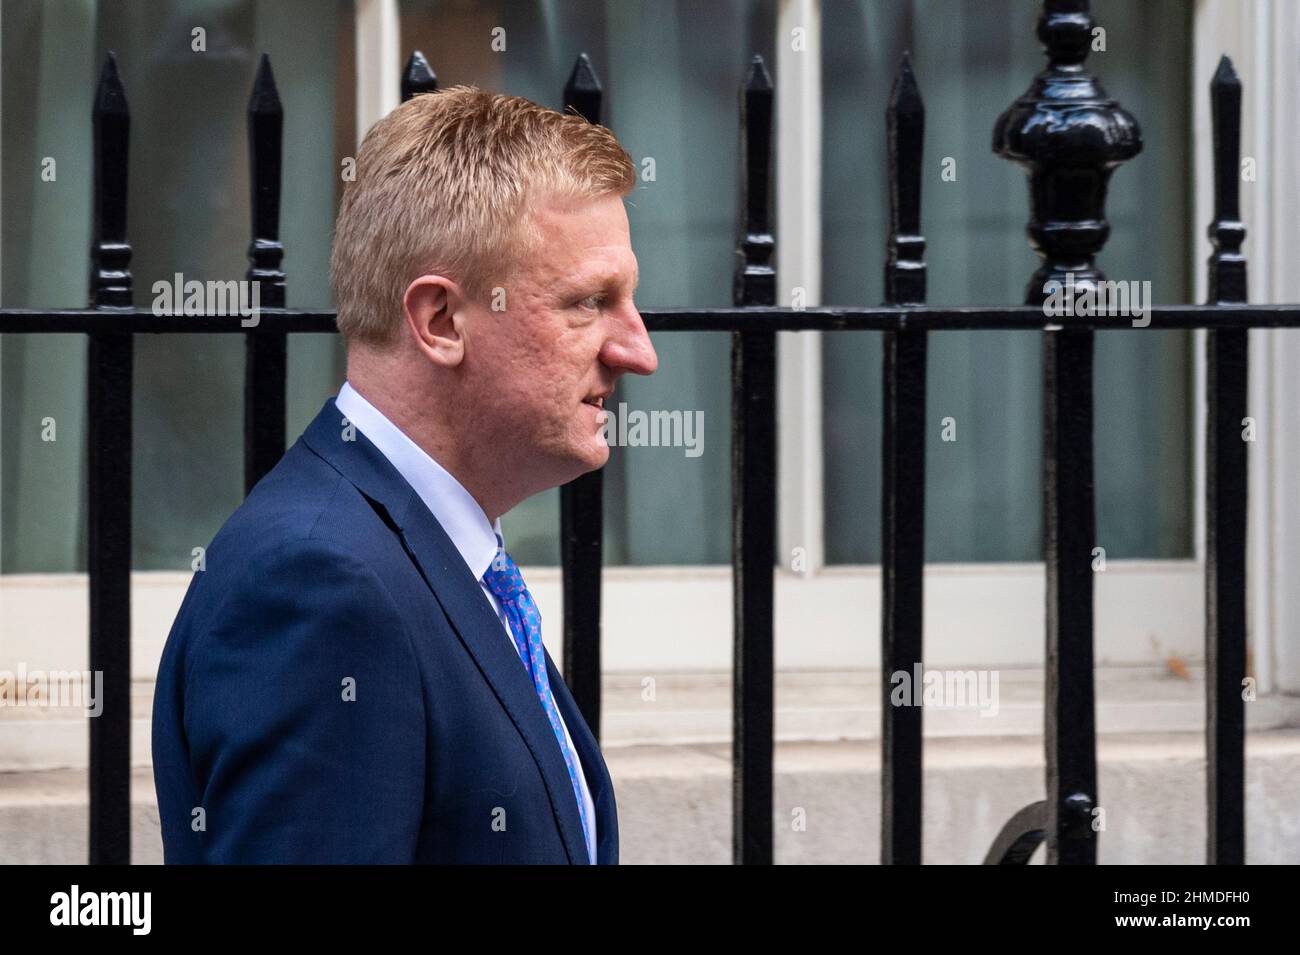 London, UK.  9 February 2022.  Oliver Dowden, Conservative Party chairman, in Downing Street ahead of Prime Minister’s Questions (PMQs) at the House of Commons.  Credit: Stephen Chung / Alamy Live News Stock Photo